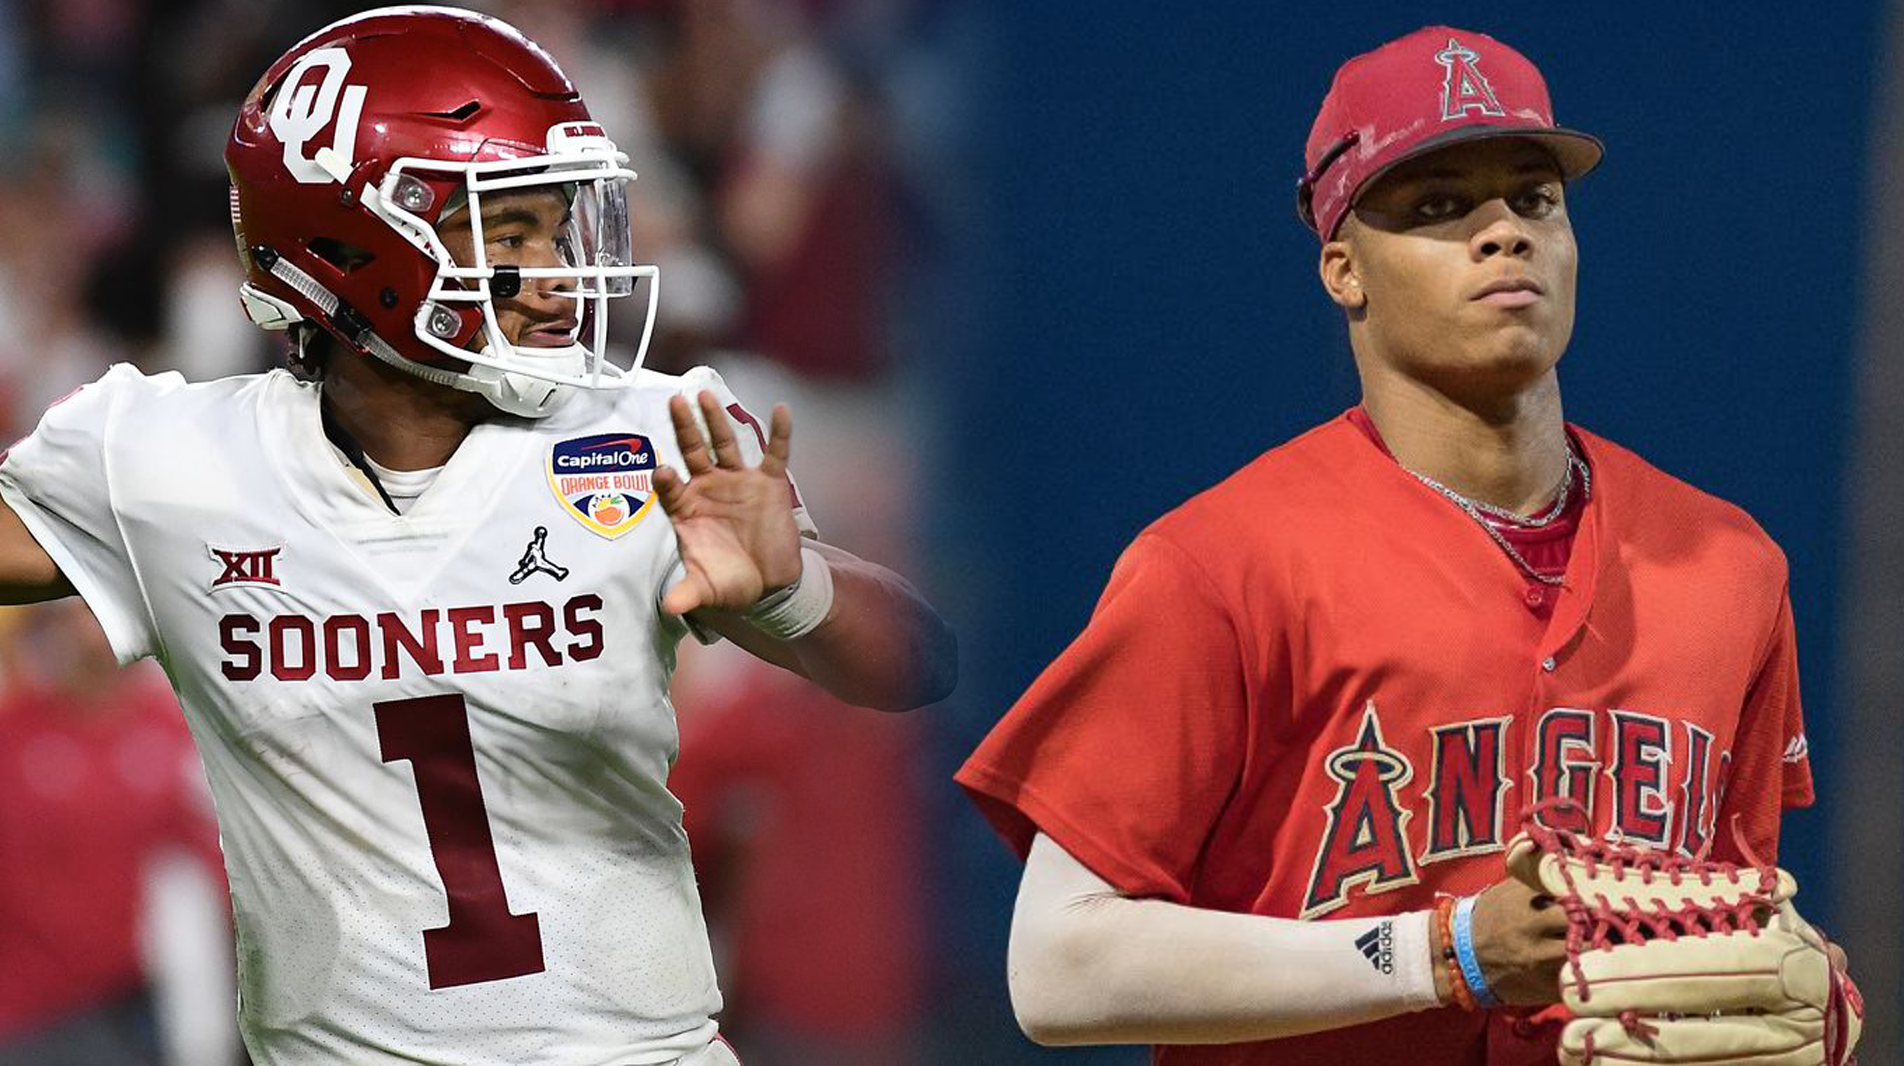 Kyler Murray chooses NFL over baseball and A's, Sports